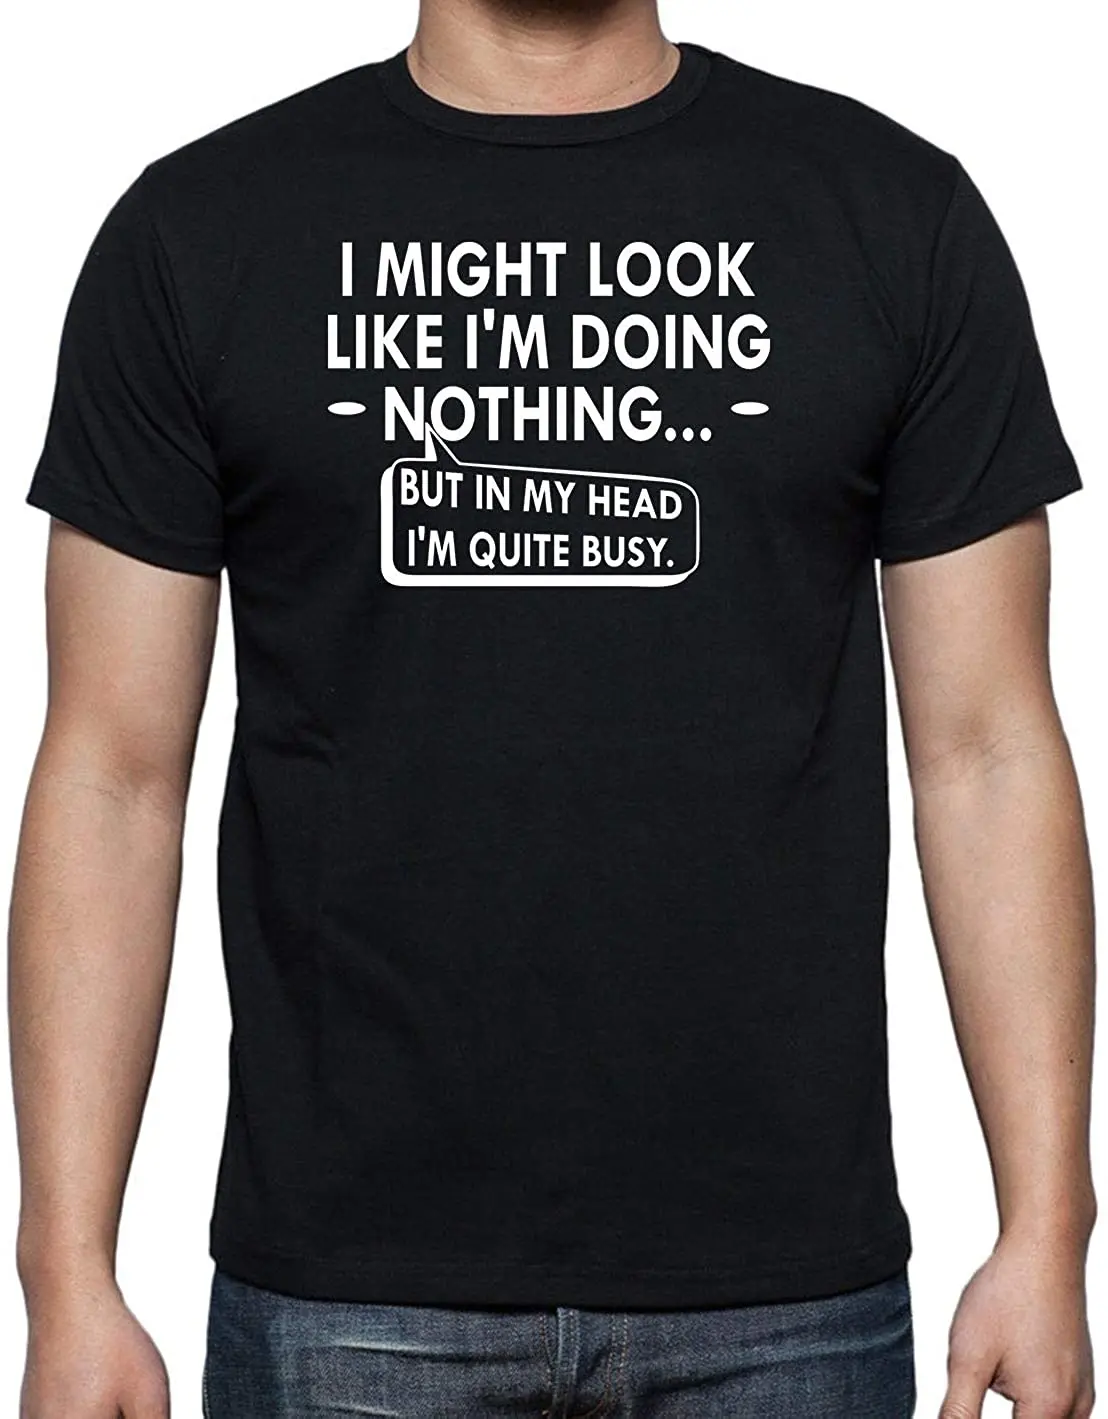 

I Might Look I'm Doing Nothing But in My Head I'm Quite Busy - Funny Sarcastic Humor Mens T-Shirt